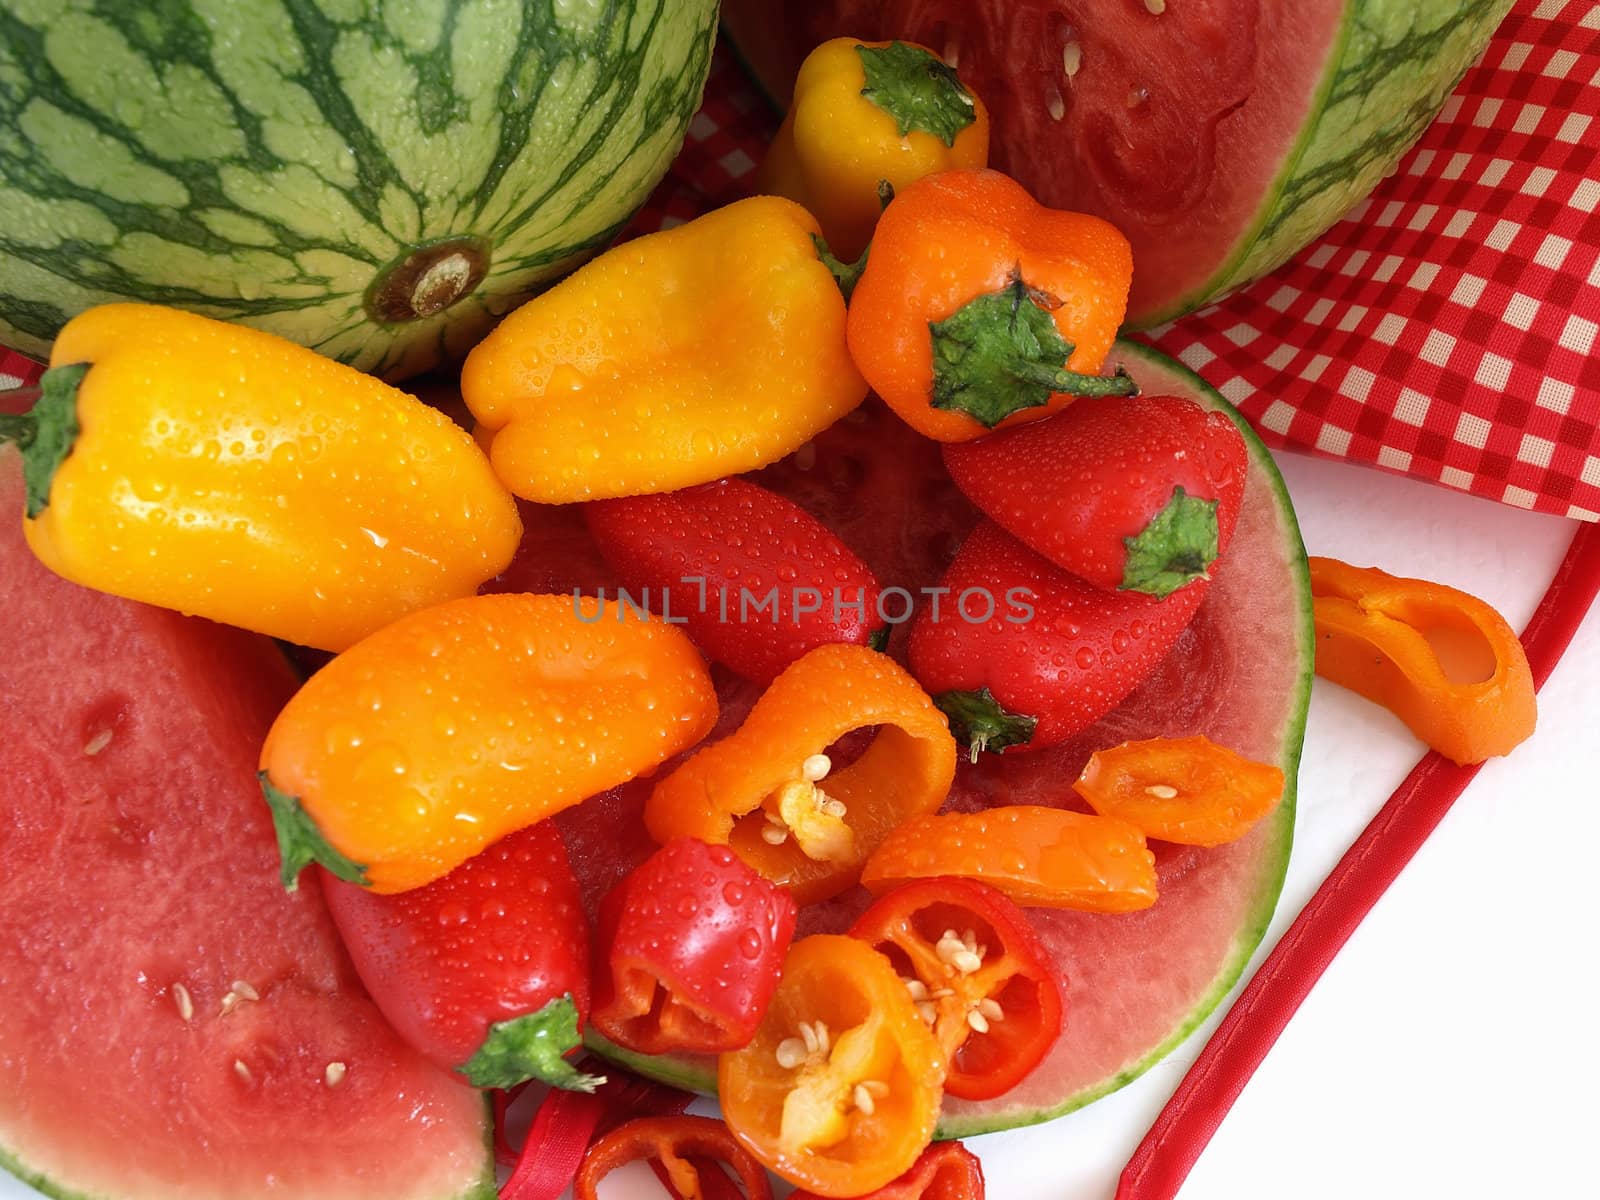 Melon and Peppers by RGebbiePhoto